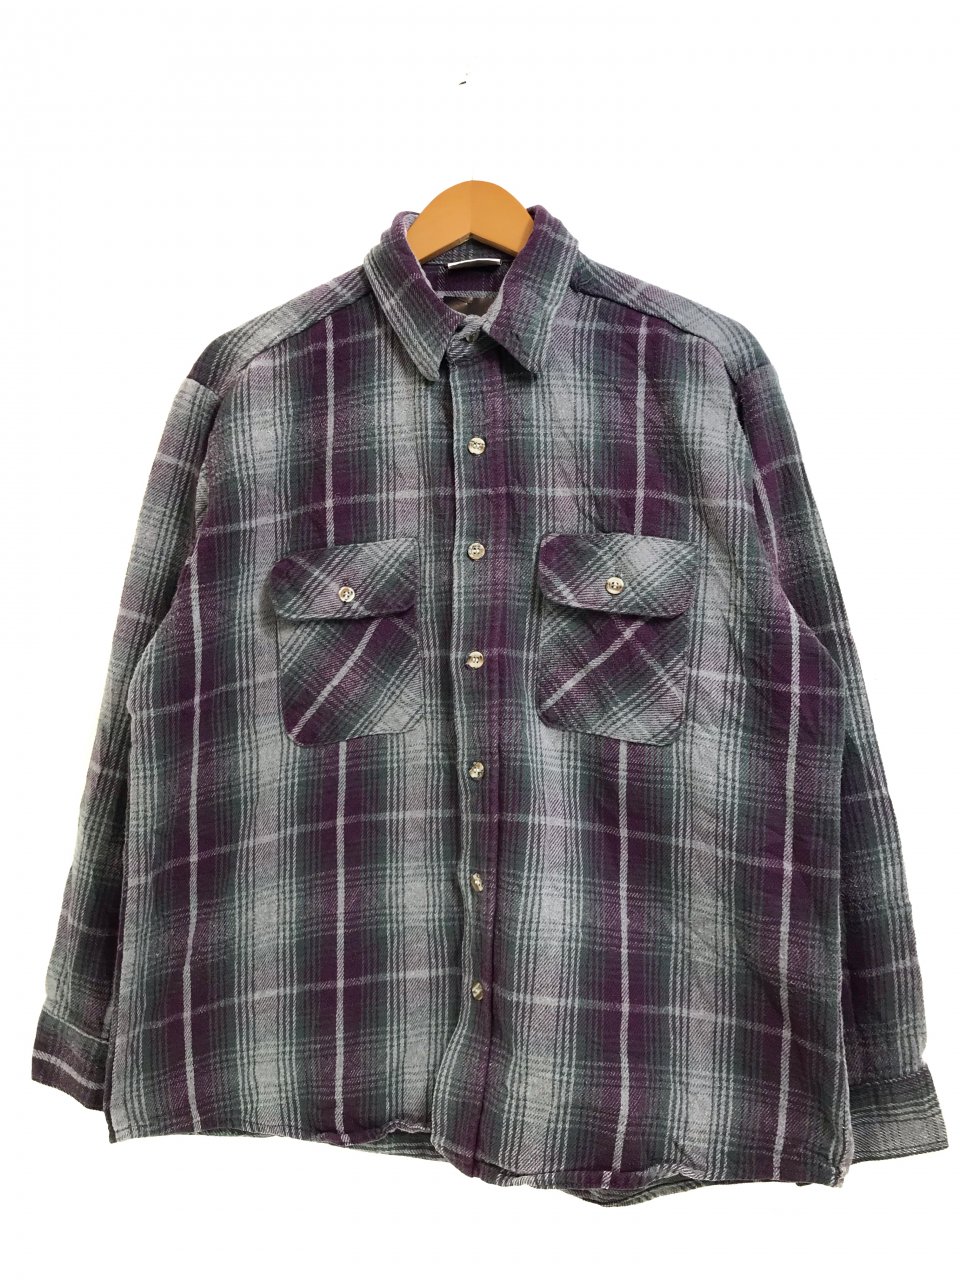 USA製 90s FIVE BROTHER Check Flannel L/S Shirt 紫 L ファイブ